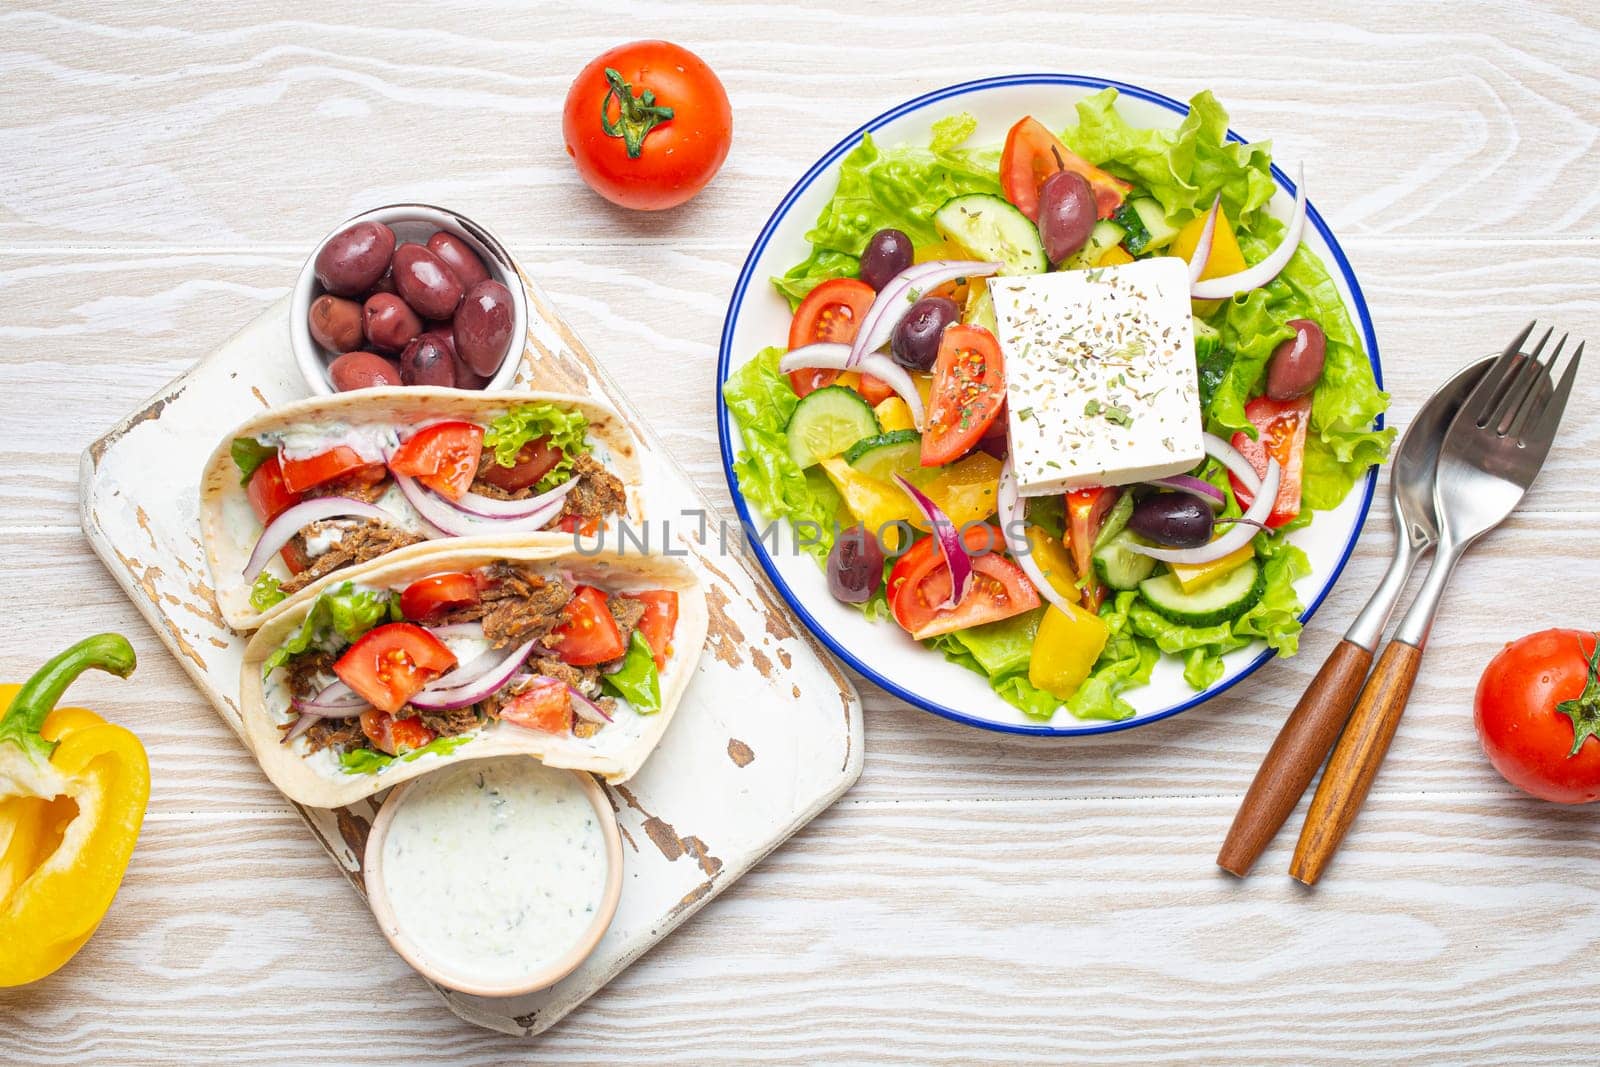 Traditional Greek Food: Greek Salad, Gyros with meat and vegetables, Tzatziki sauce, Olives on White rustic wooden table background top view. Cuisine of Greece